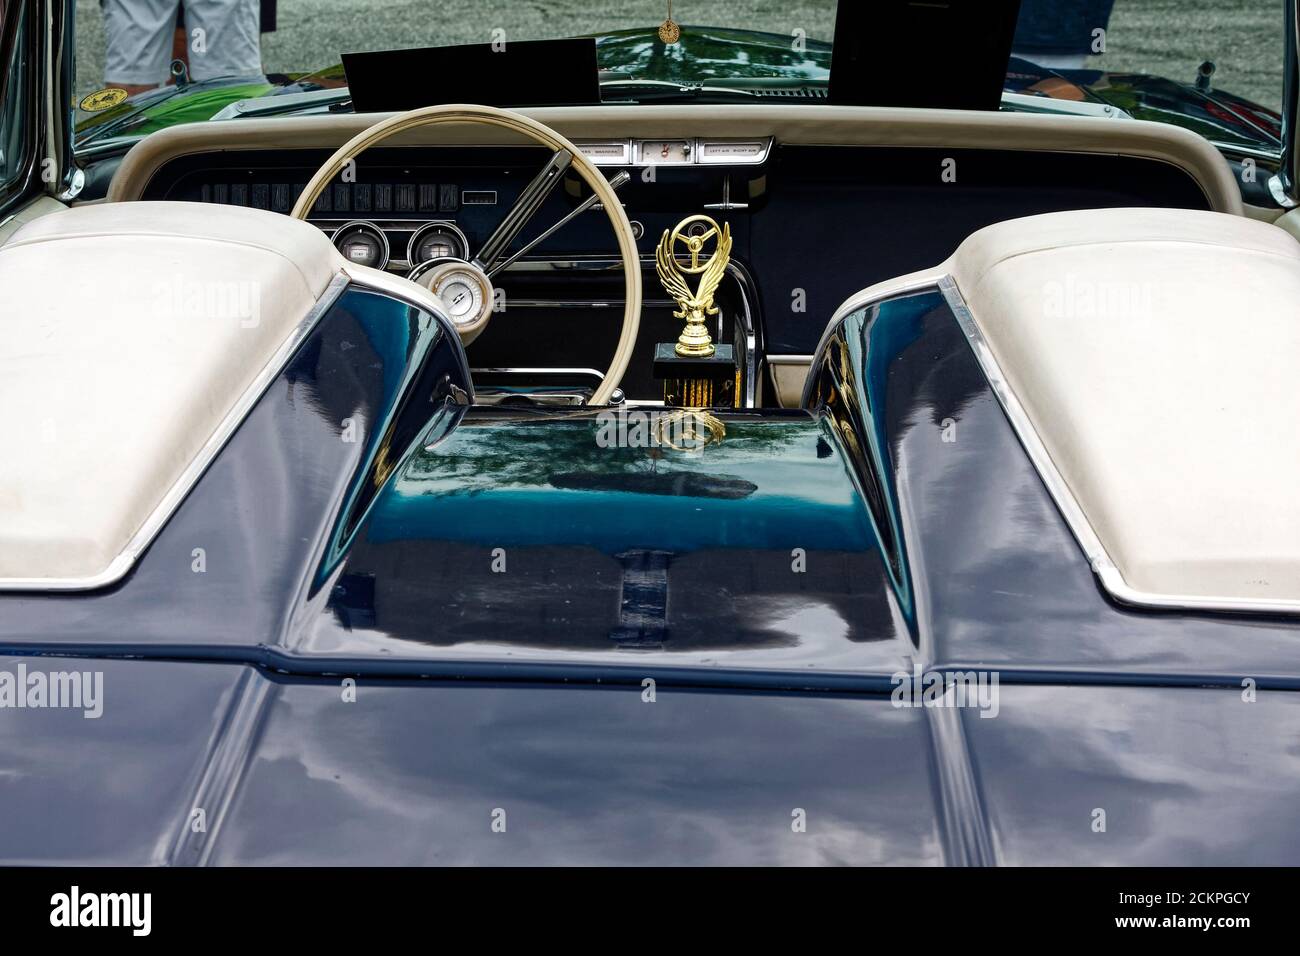 1966 Thunderbird, view from rear, close-up, antique car, transportation, luxury vehicle Stock Photo